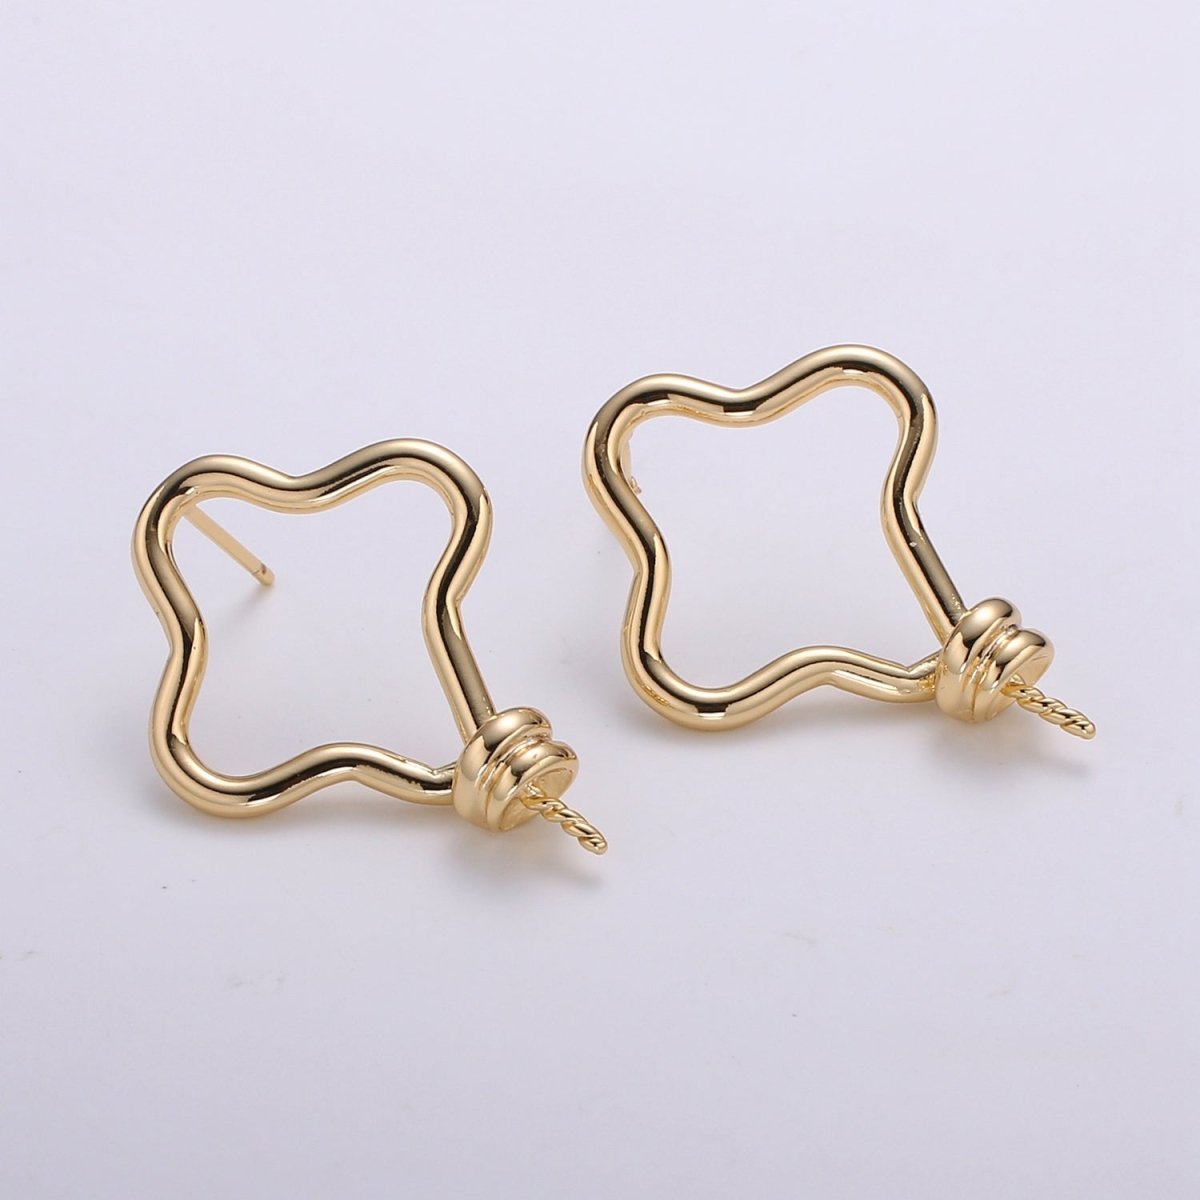 Gold Plated Clover Leaves Studs Earring Supply Plain Gold Floral Clover Earring Jewelry Supply Component GP-669 - DLUXCA